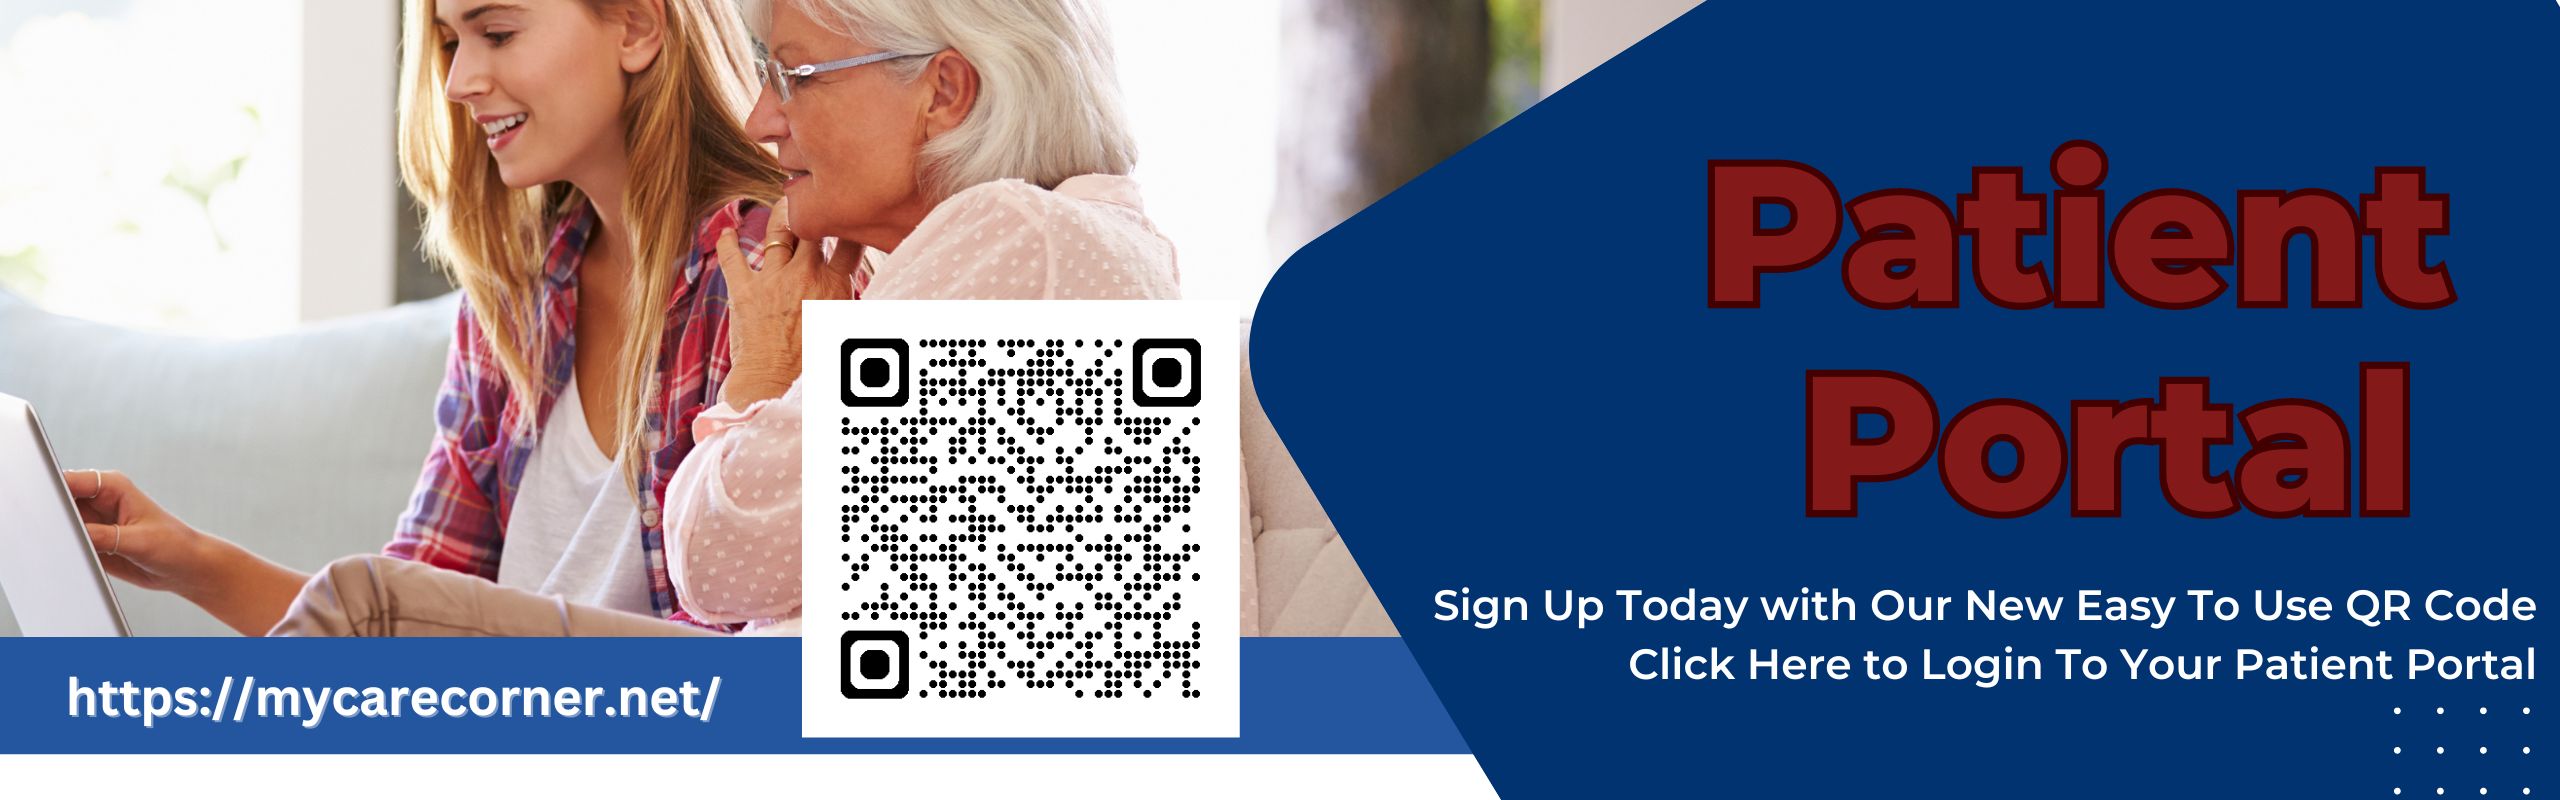 Patient Portal 
Sign up today with our new easy to use QR code
Click here to login to your patient portal 
https://mycarecorner.net/